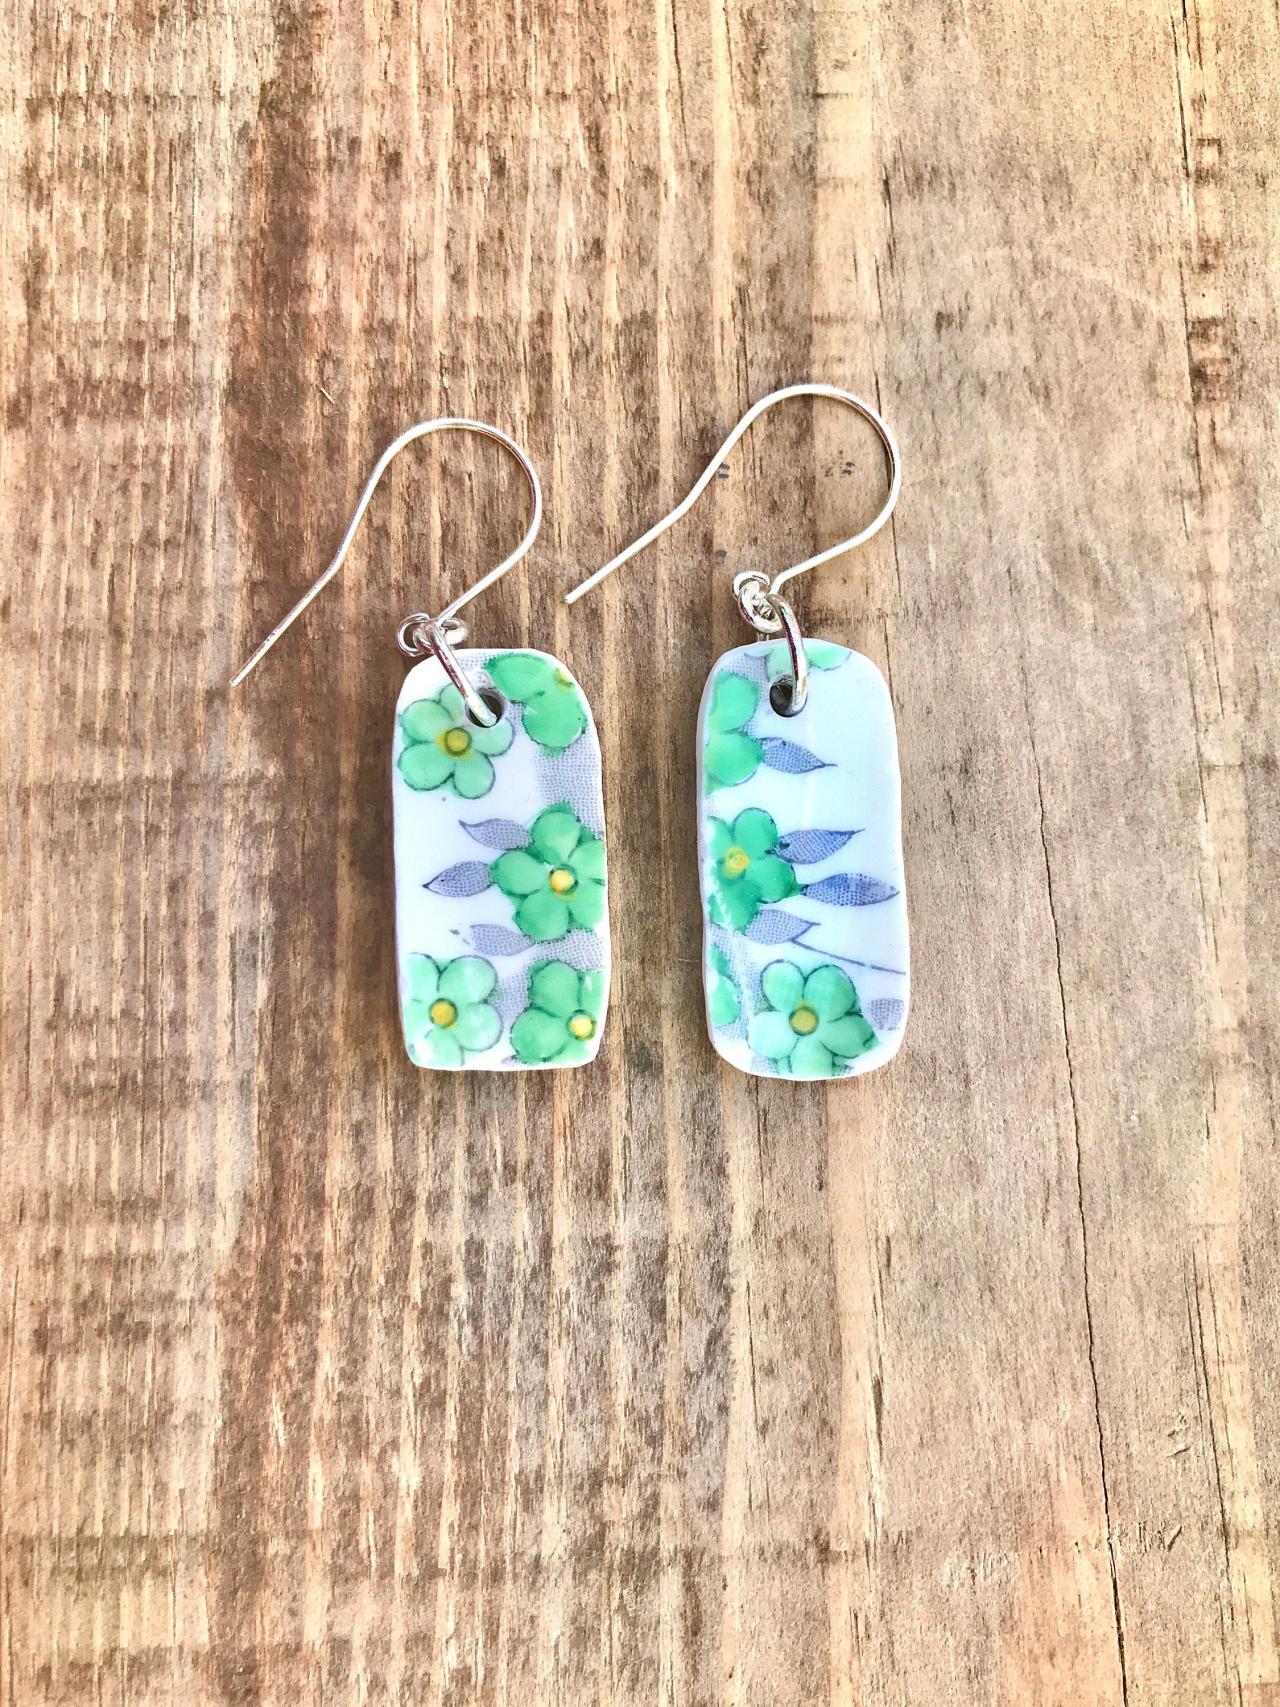 Gorgeous green floral vintage recycled broken China earrings with sterling silver wires.